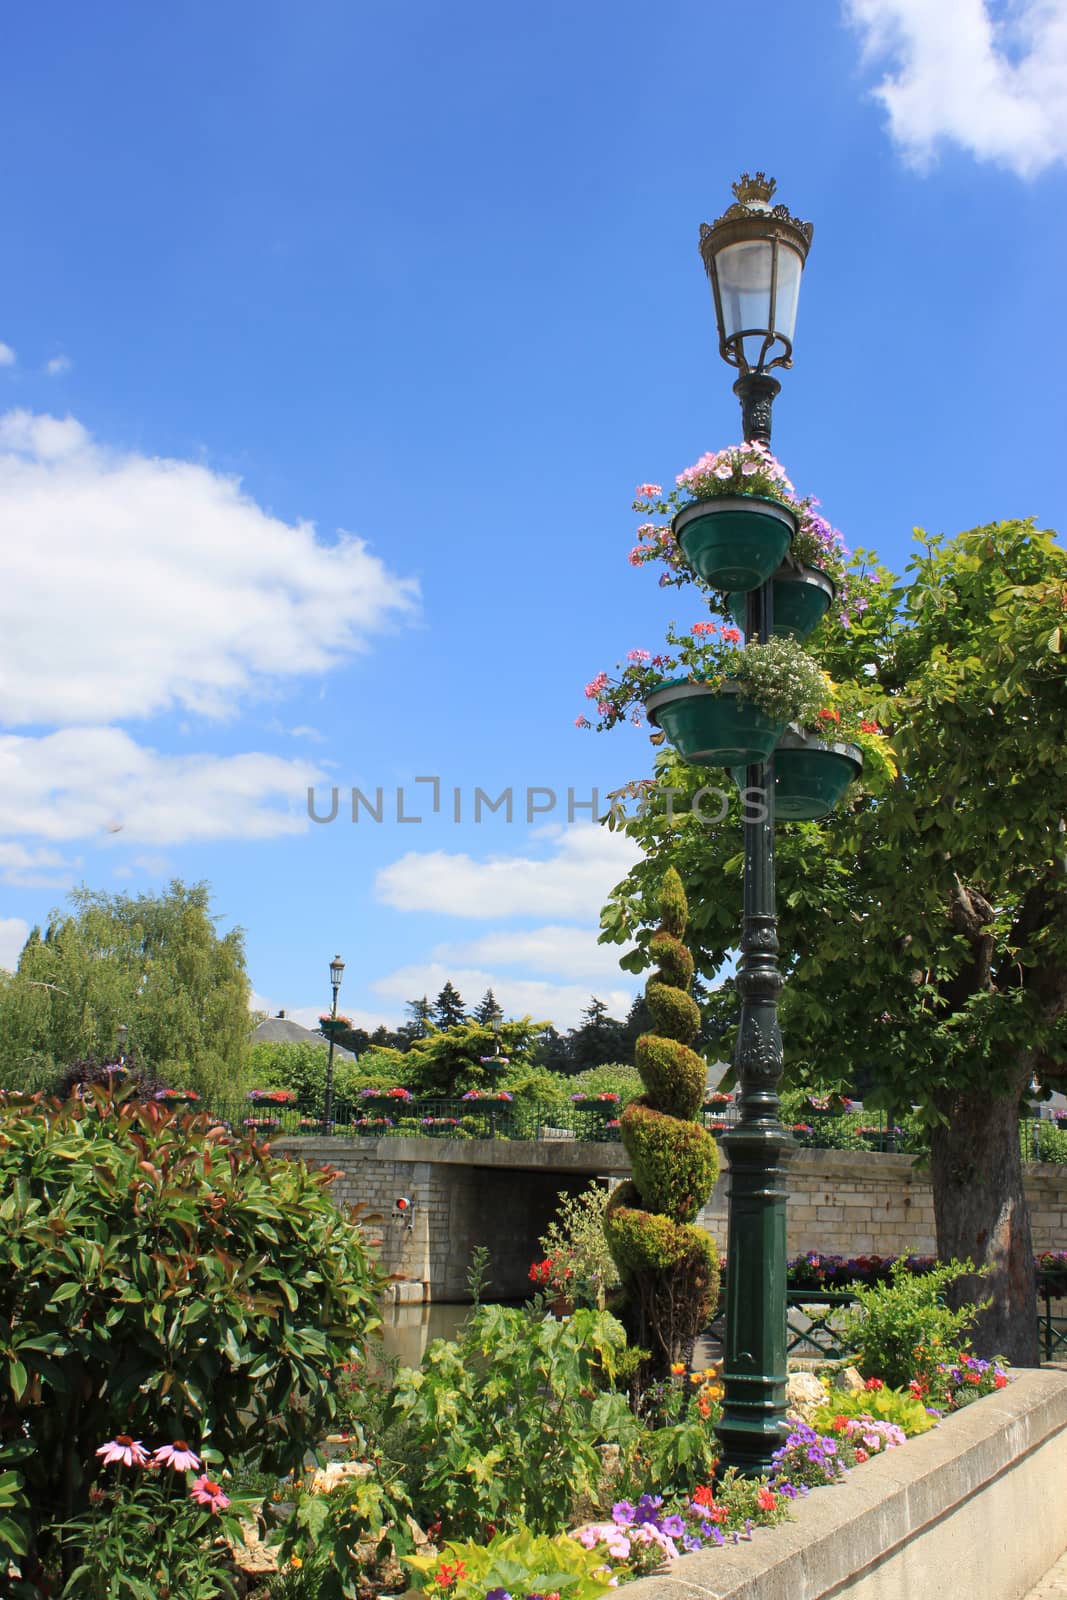 lamppost covered with flowers in a park on a background of blue sky with clouds